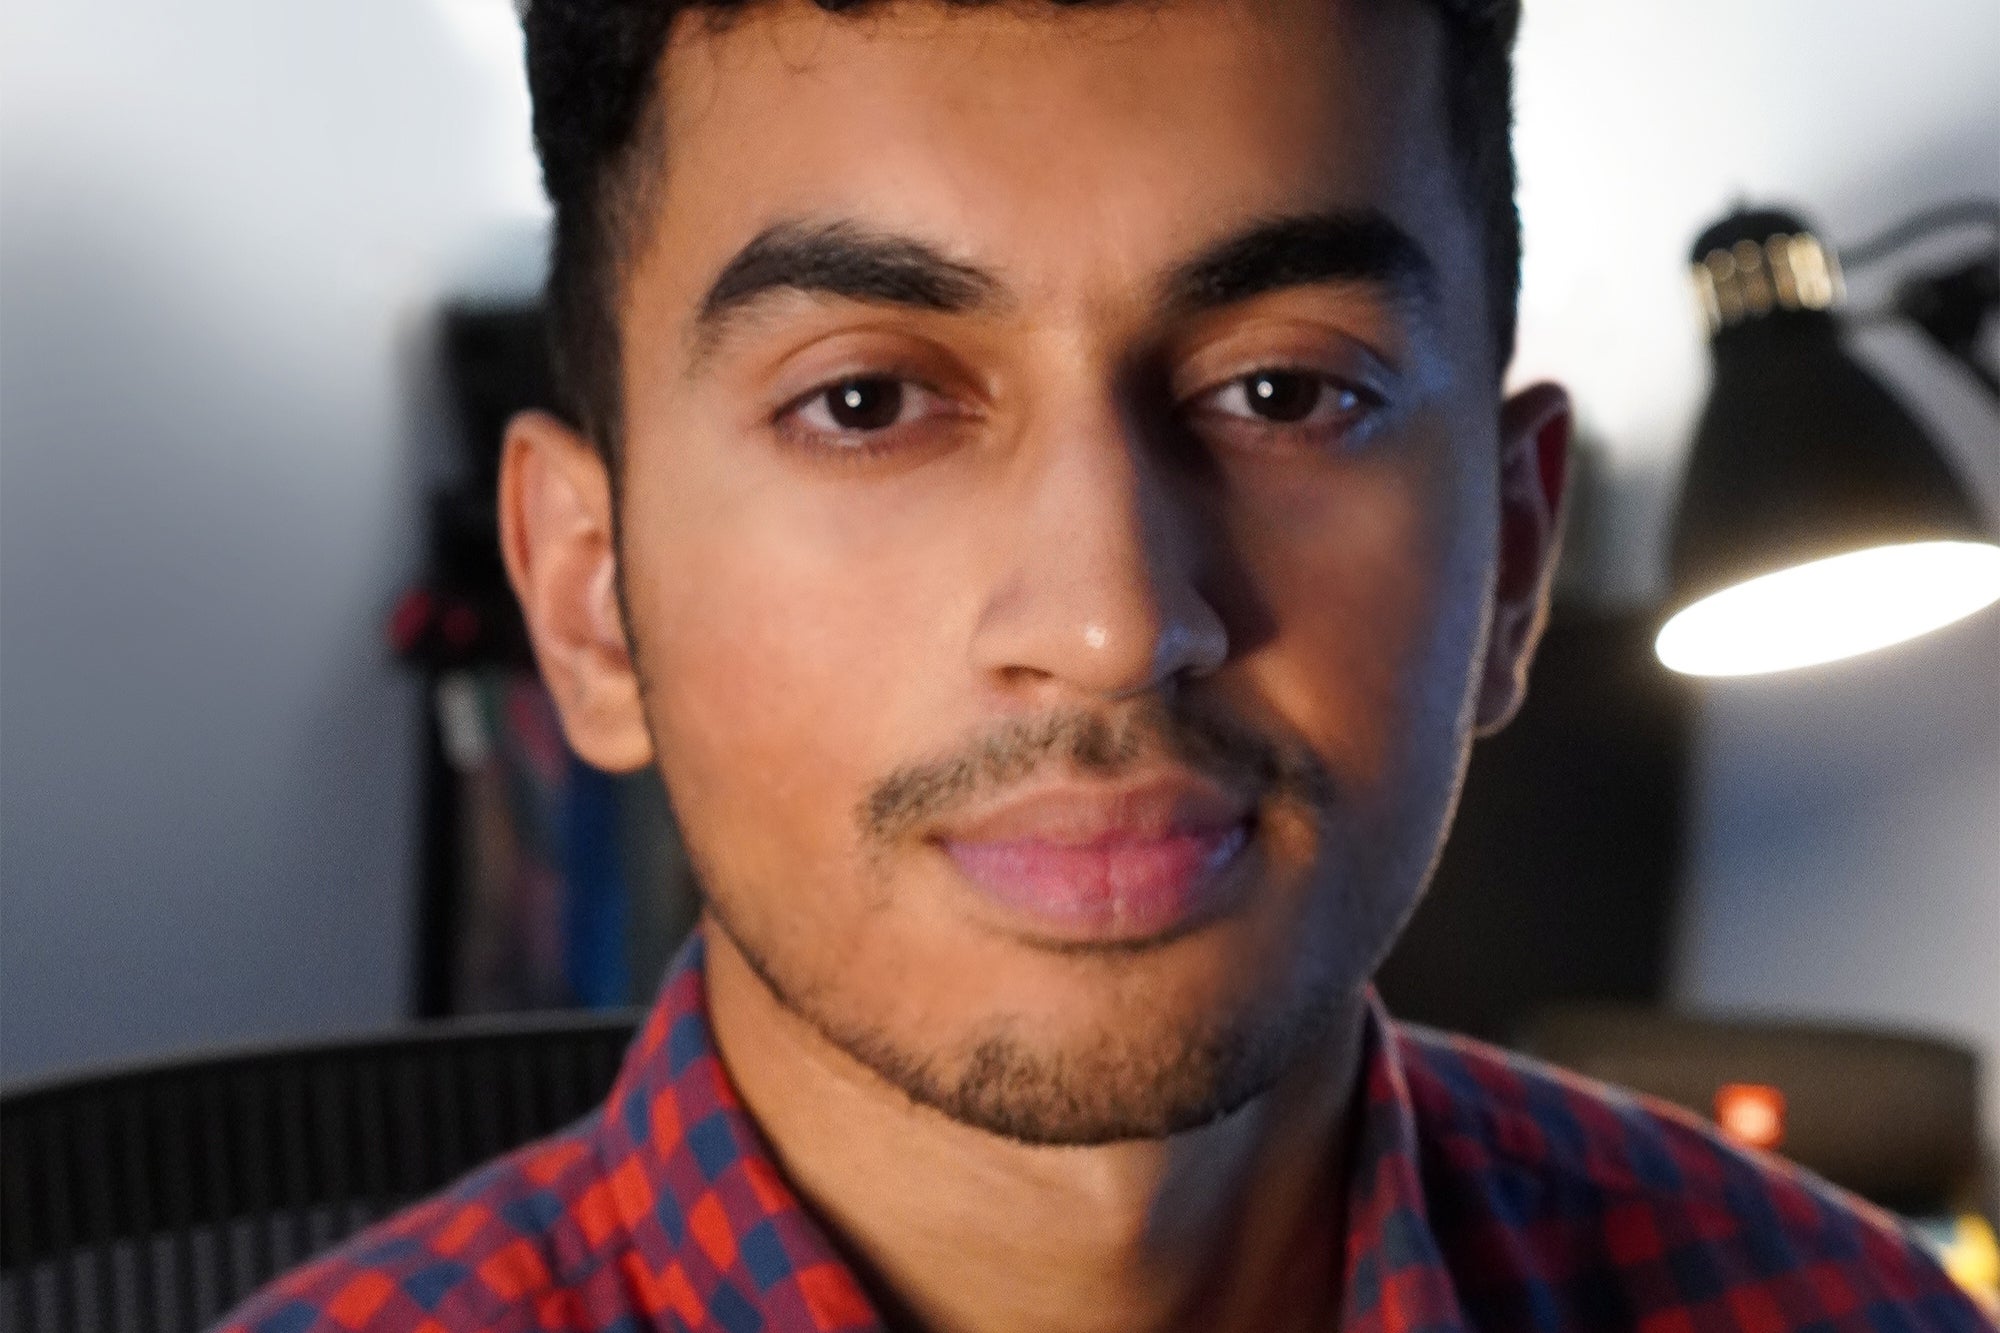 When This 22-Year-Old Graduated From MIT, He Thought He'd Be a Software Engineer. Instead, He Launched a Company That's Shaking Up the College-Admissions Game.